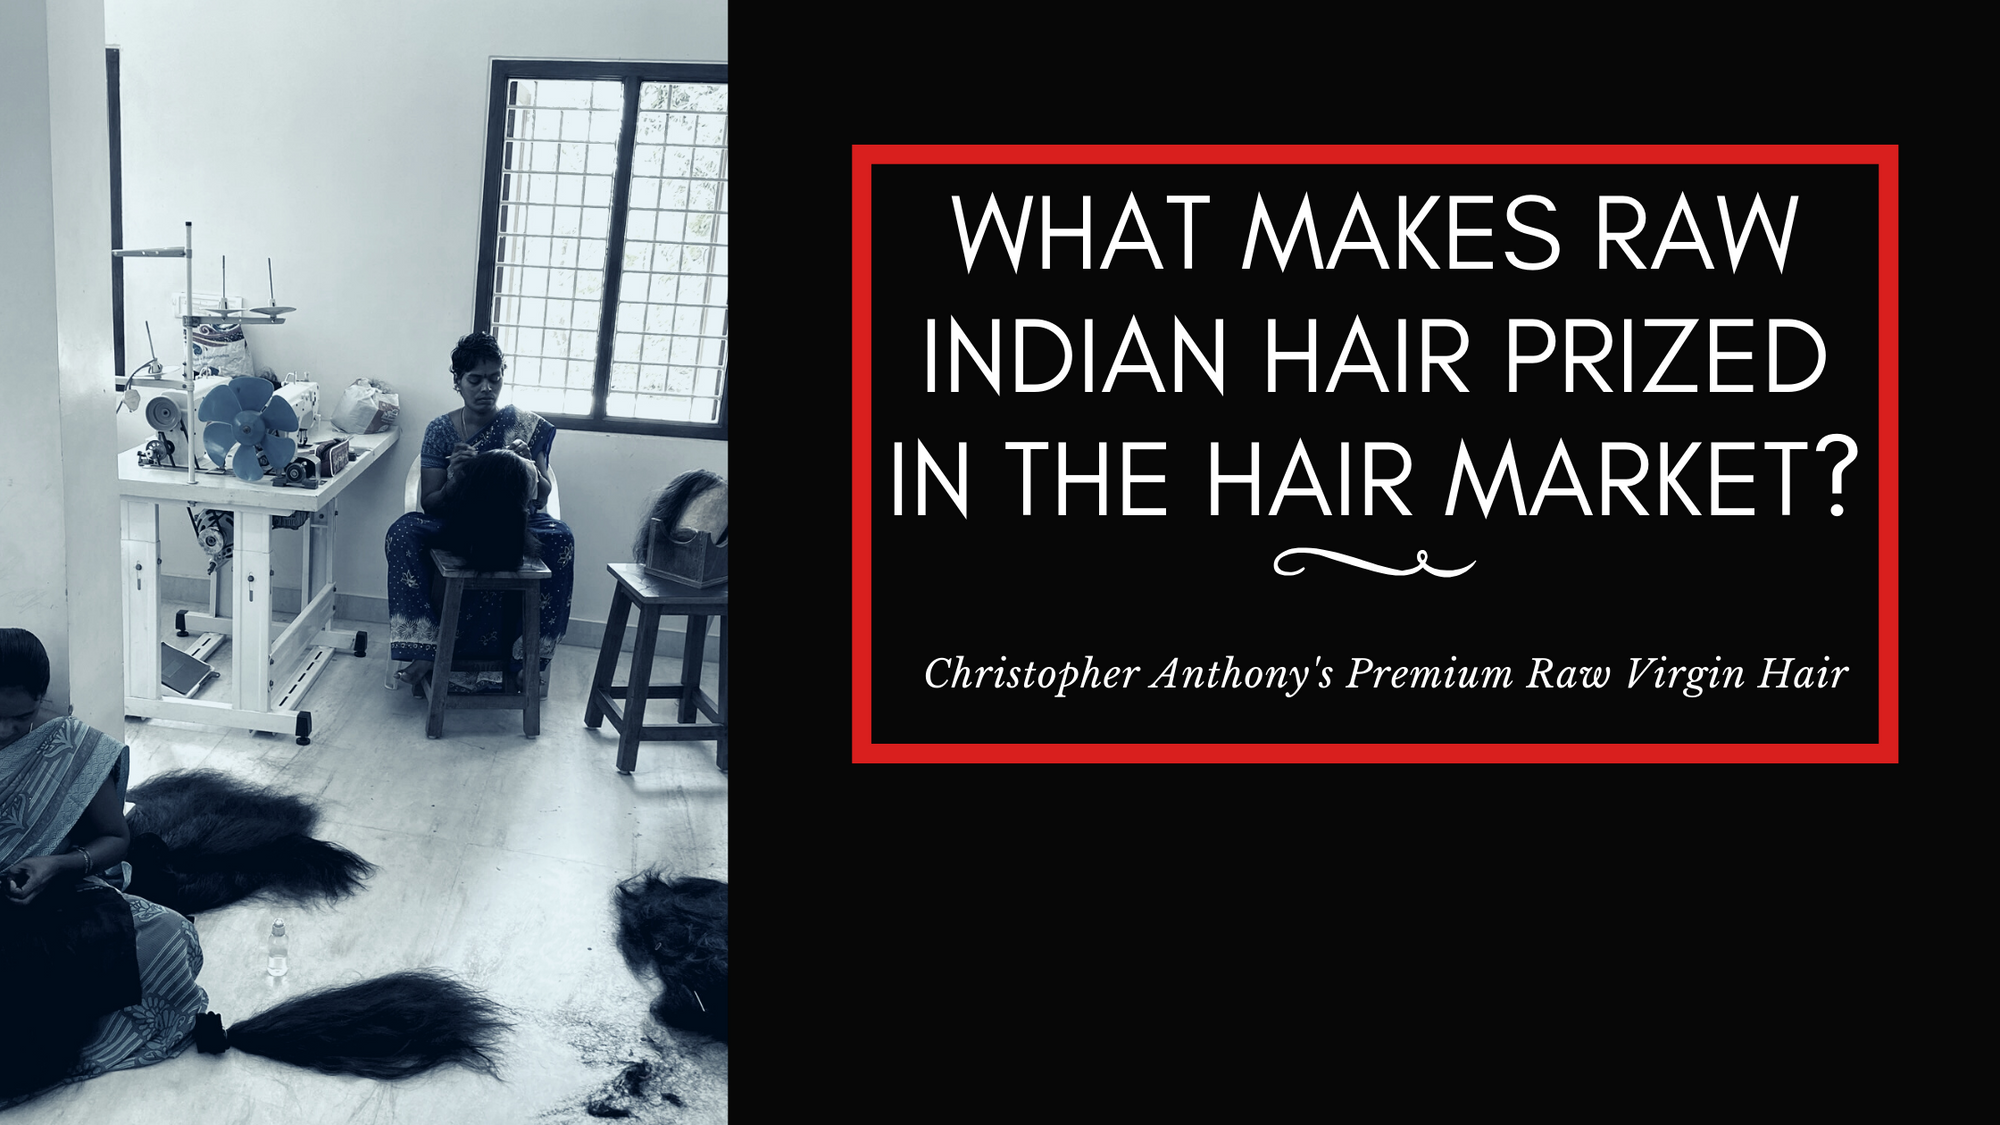 What Makes Raw Indian Hair Prized in the Hair Market?